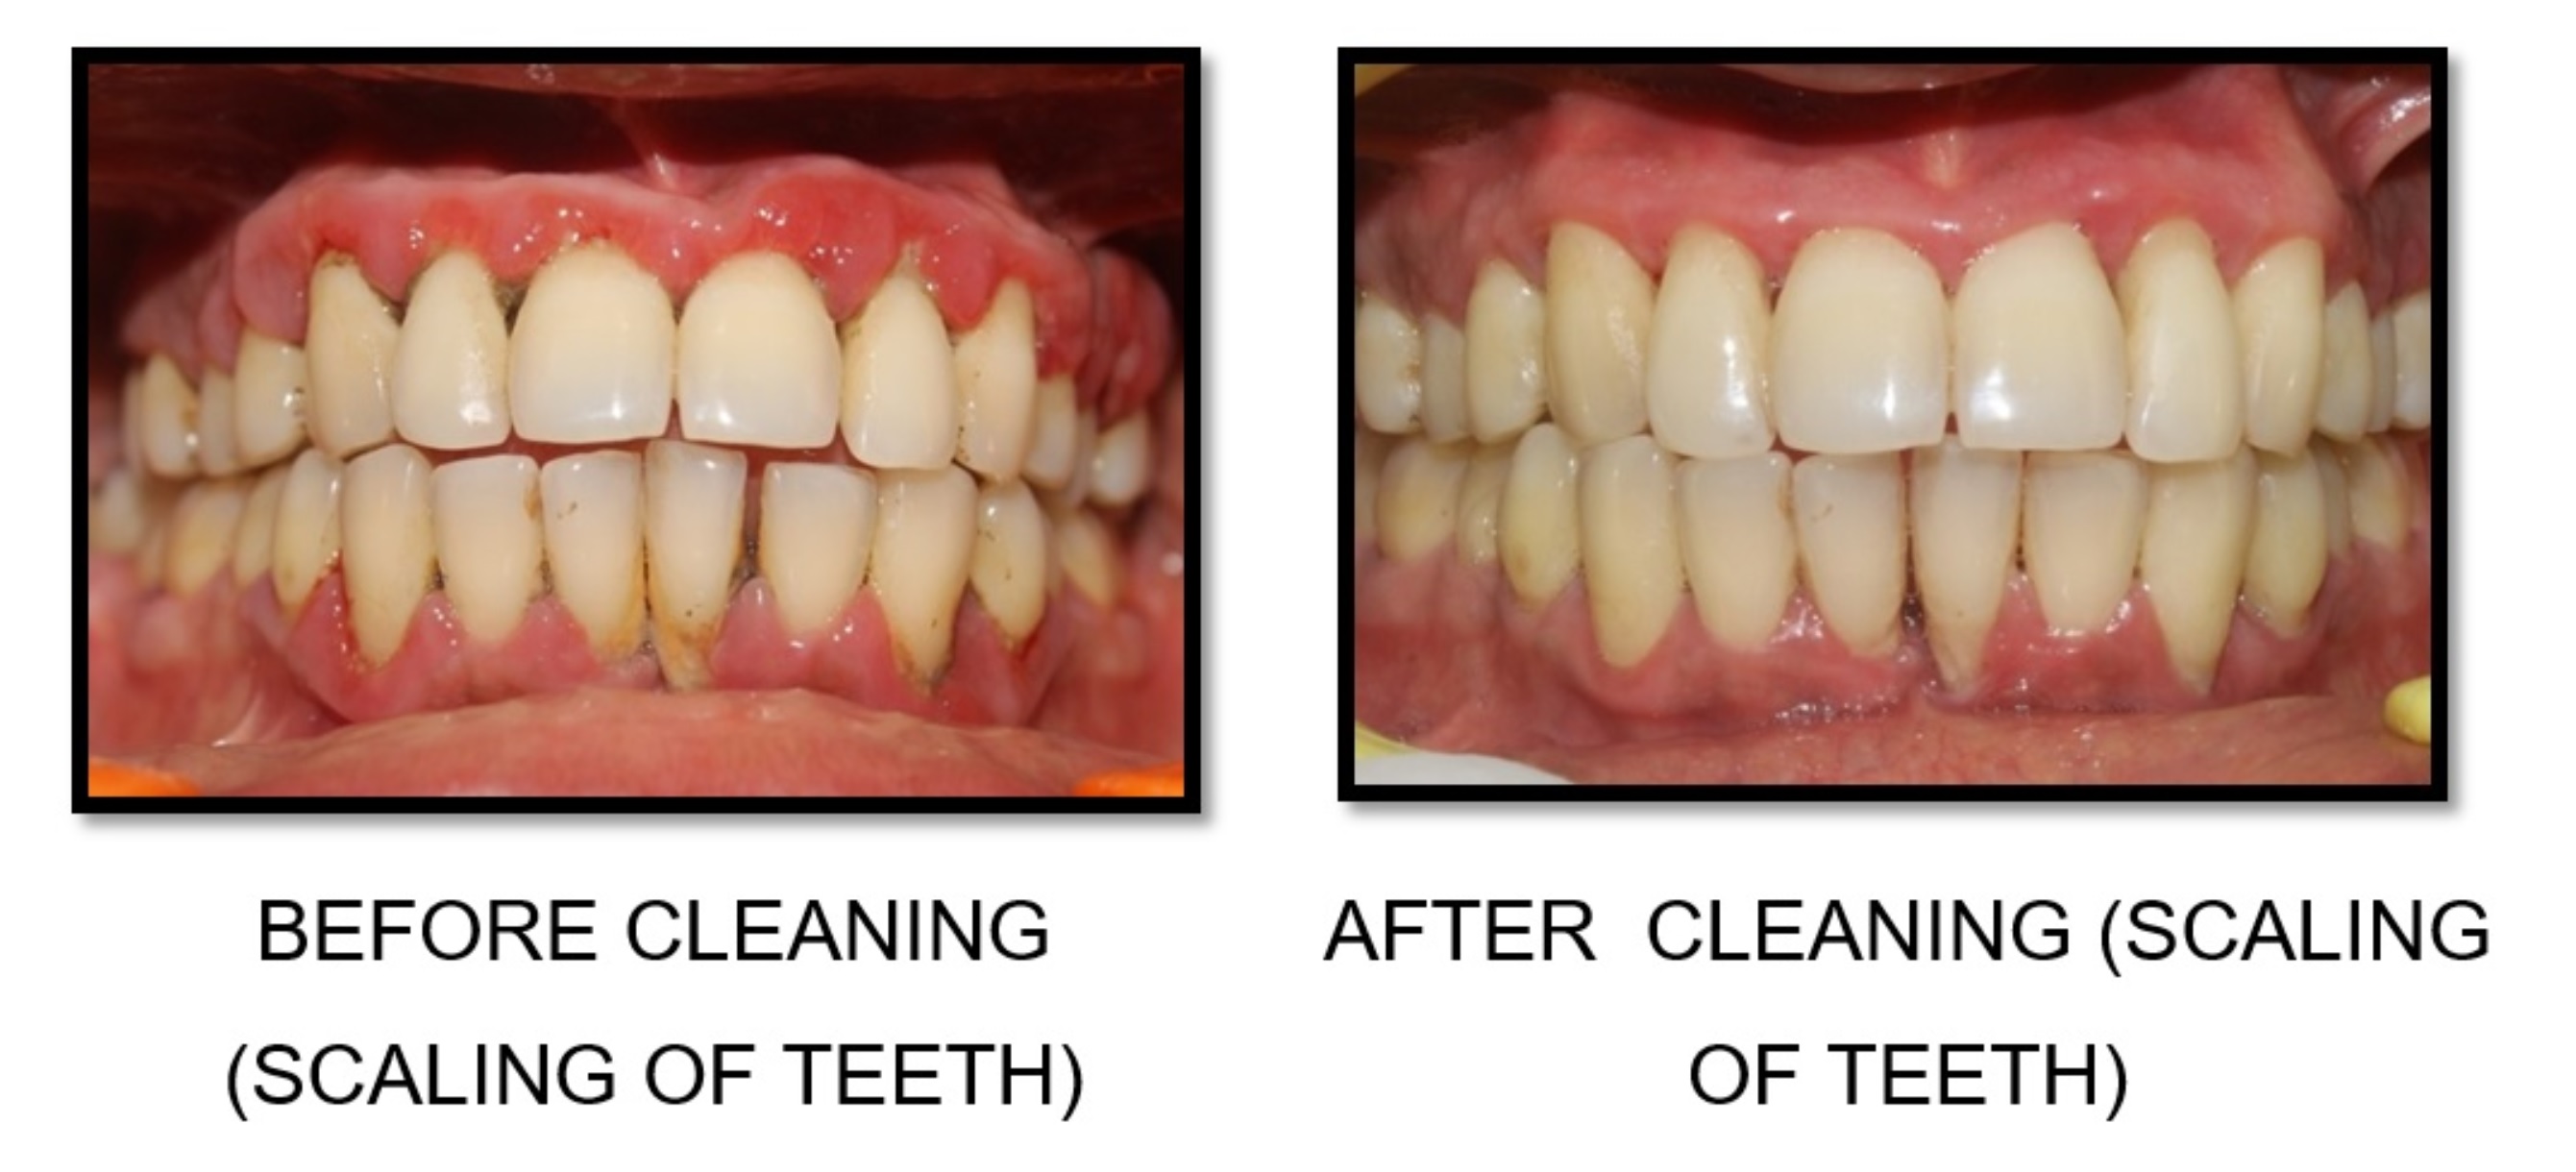 Meaning teeth scaling Ask Well: